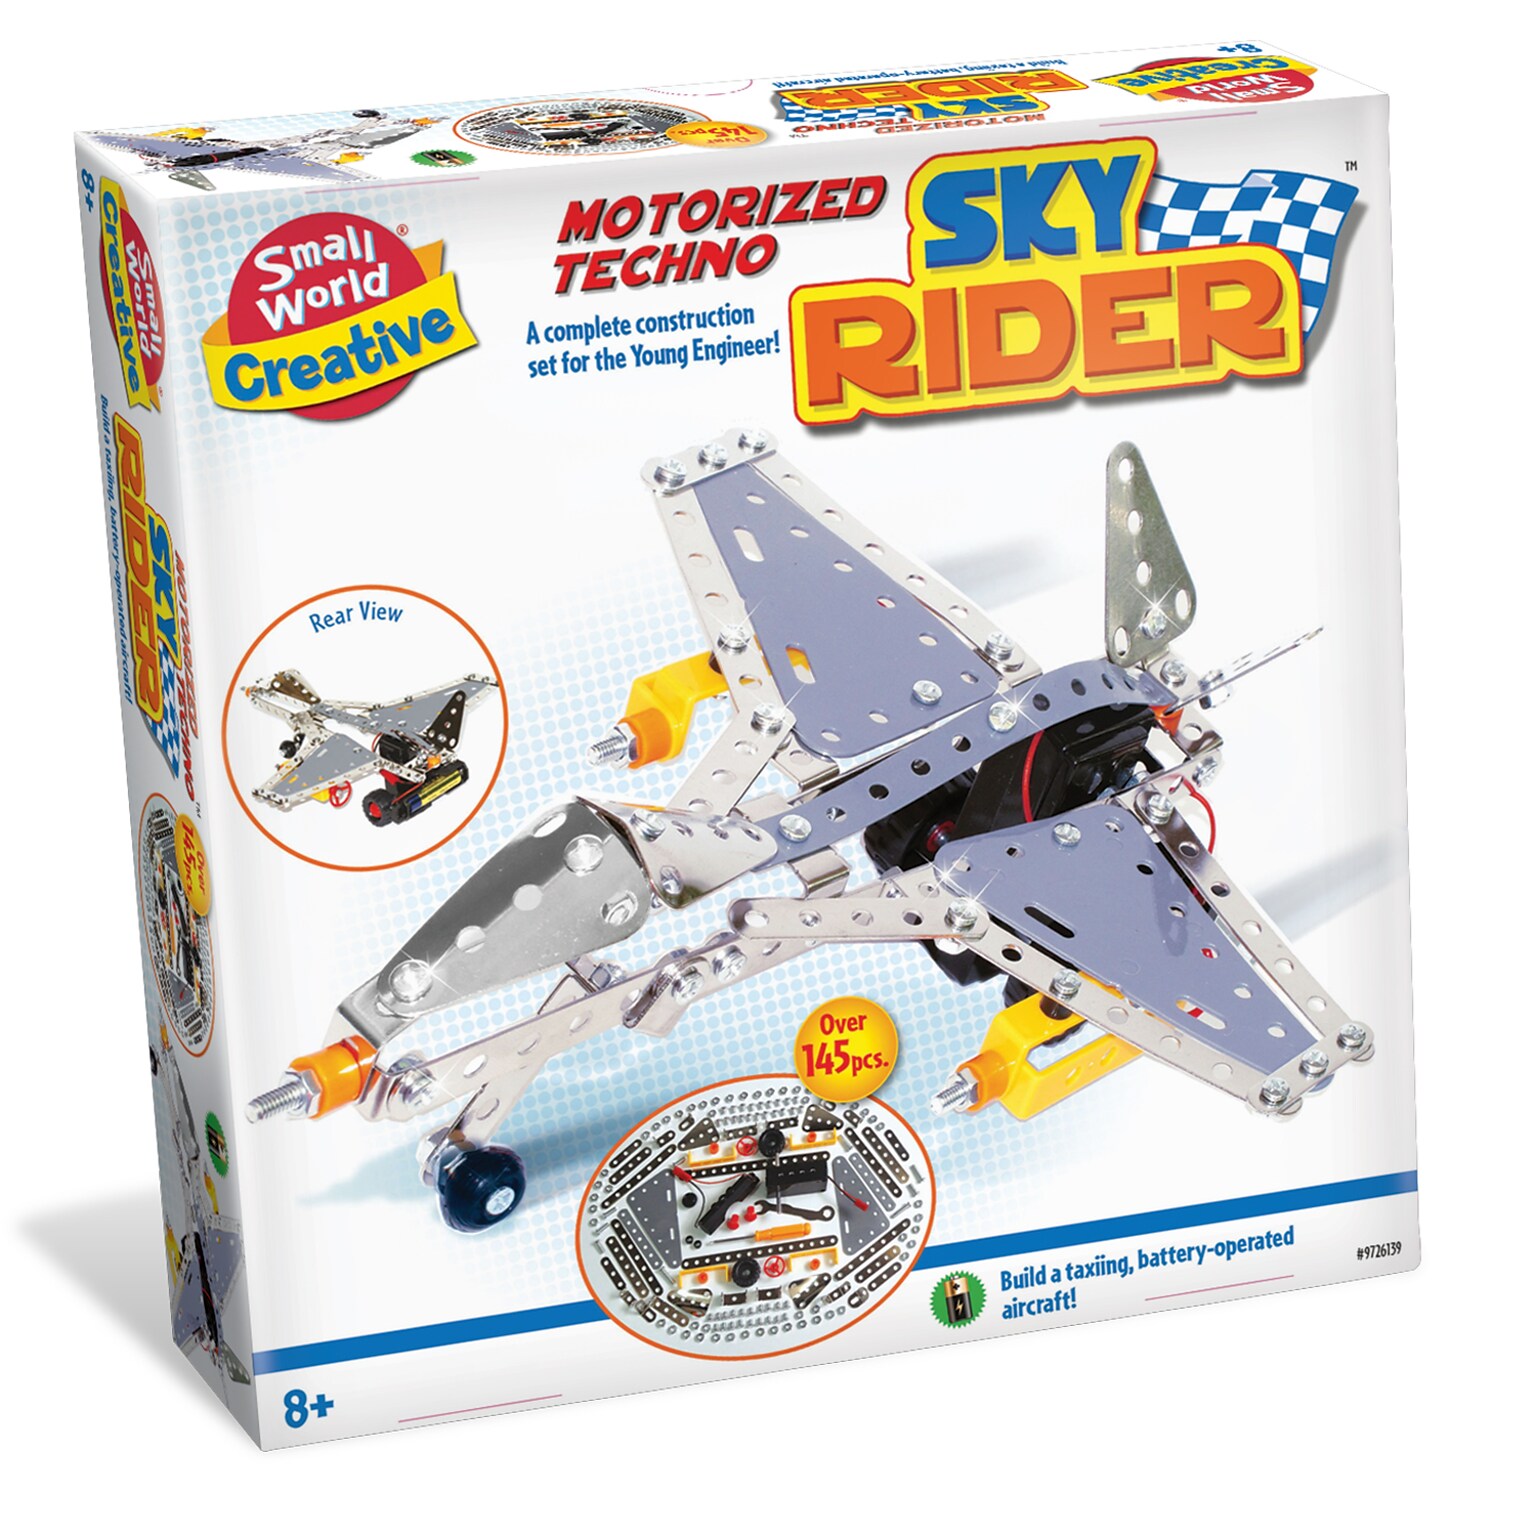 Small World Toys Motorized Techno Sky Riders, 8+ Years (SWT9726139)